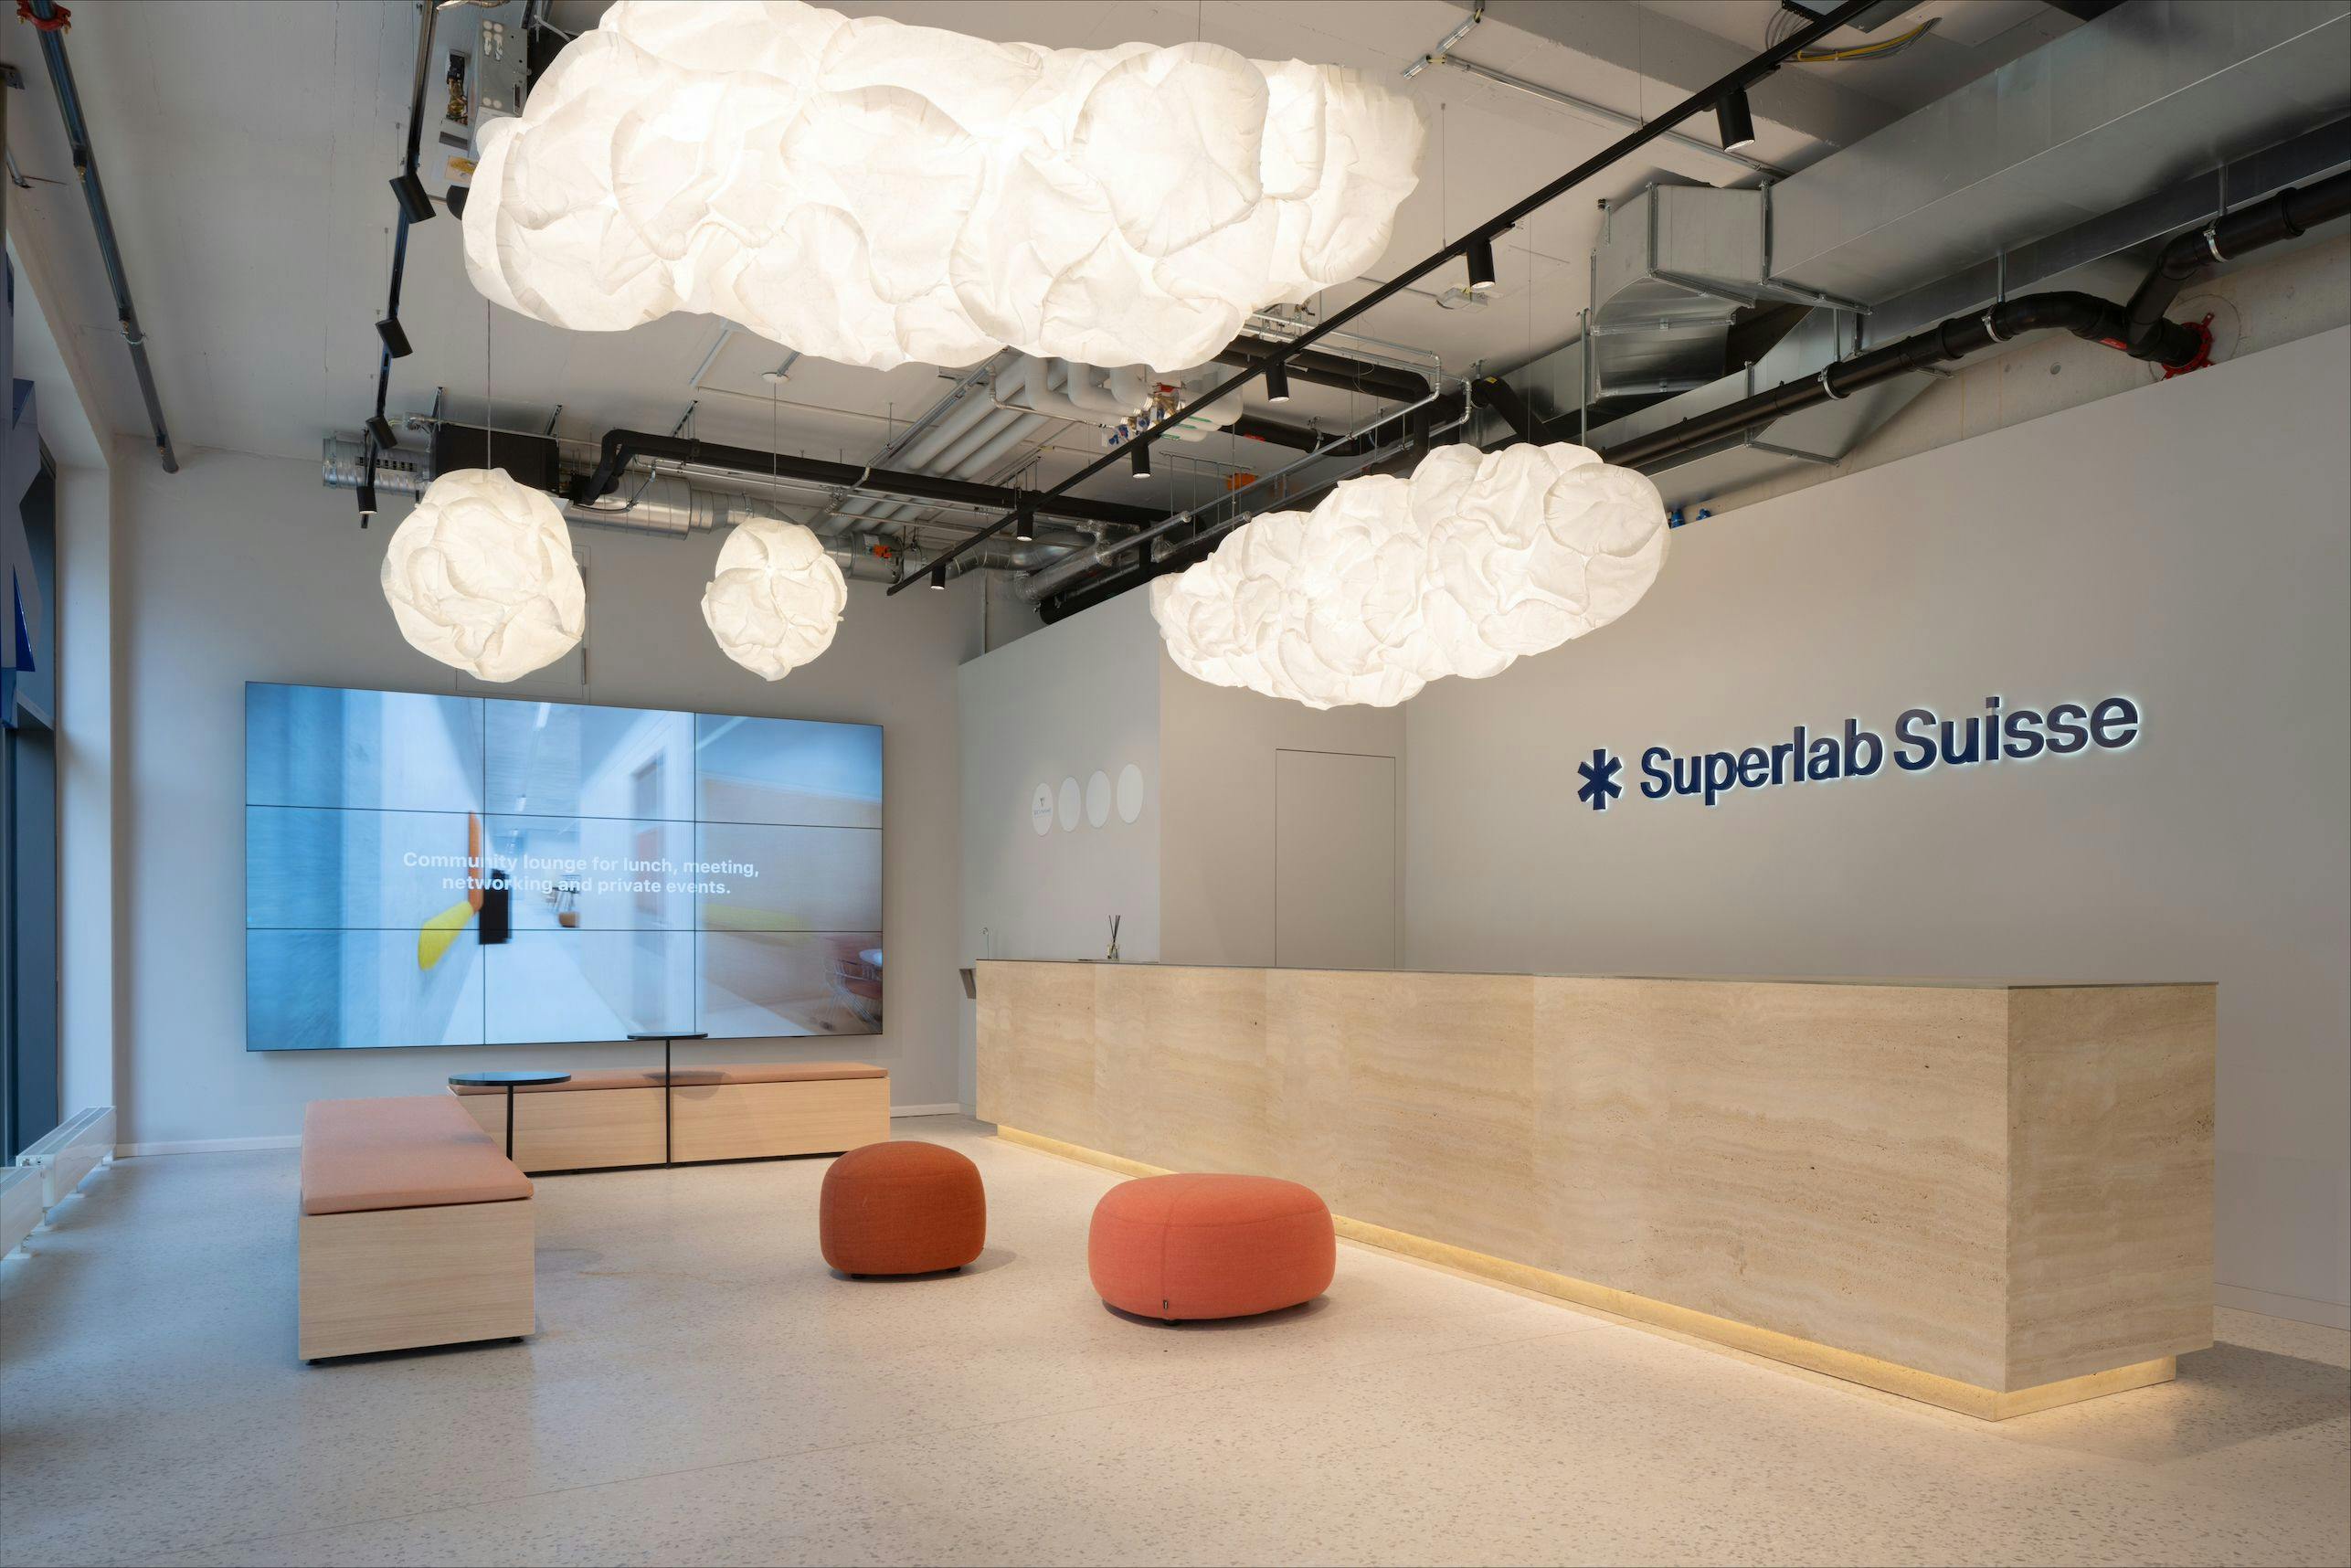 Inside the Superlab Suisse lobby. | Image Credit: © Bilal Mahmood from Superlab Suisse - stock.adobe.com